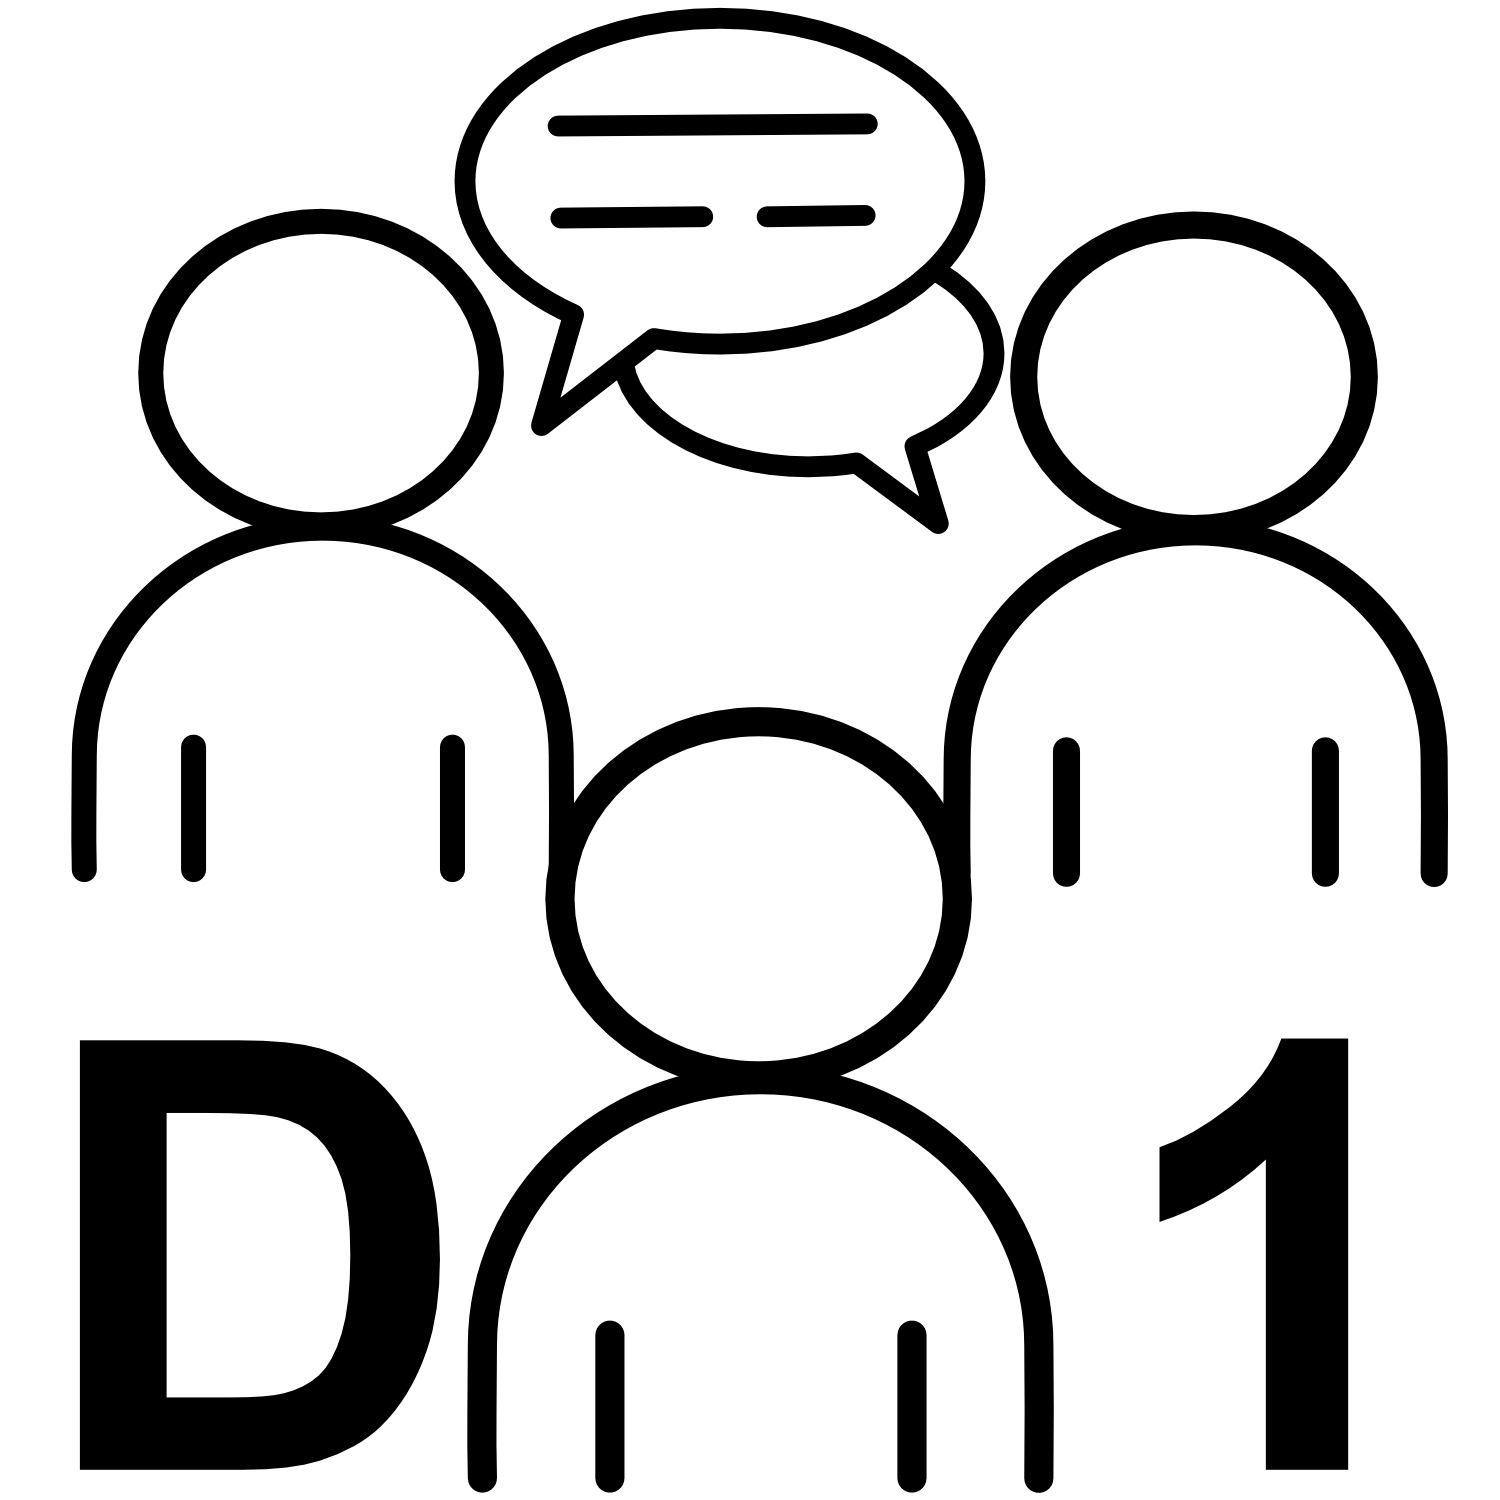 Symbol for the Debriefing Group 1. A Group of people talking.